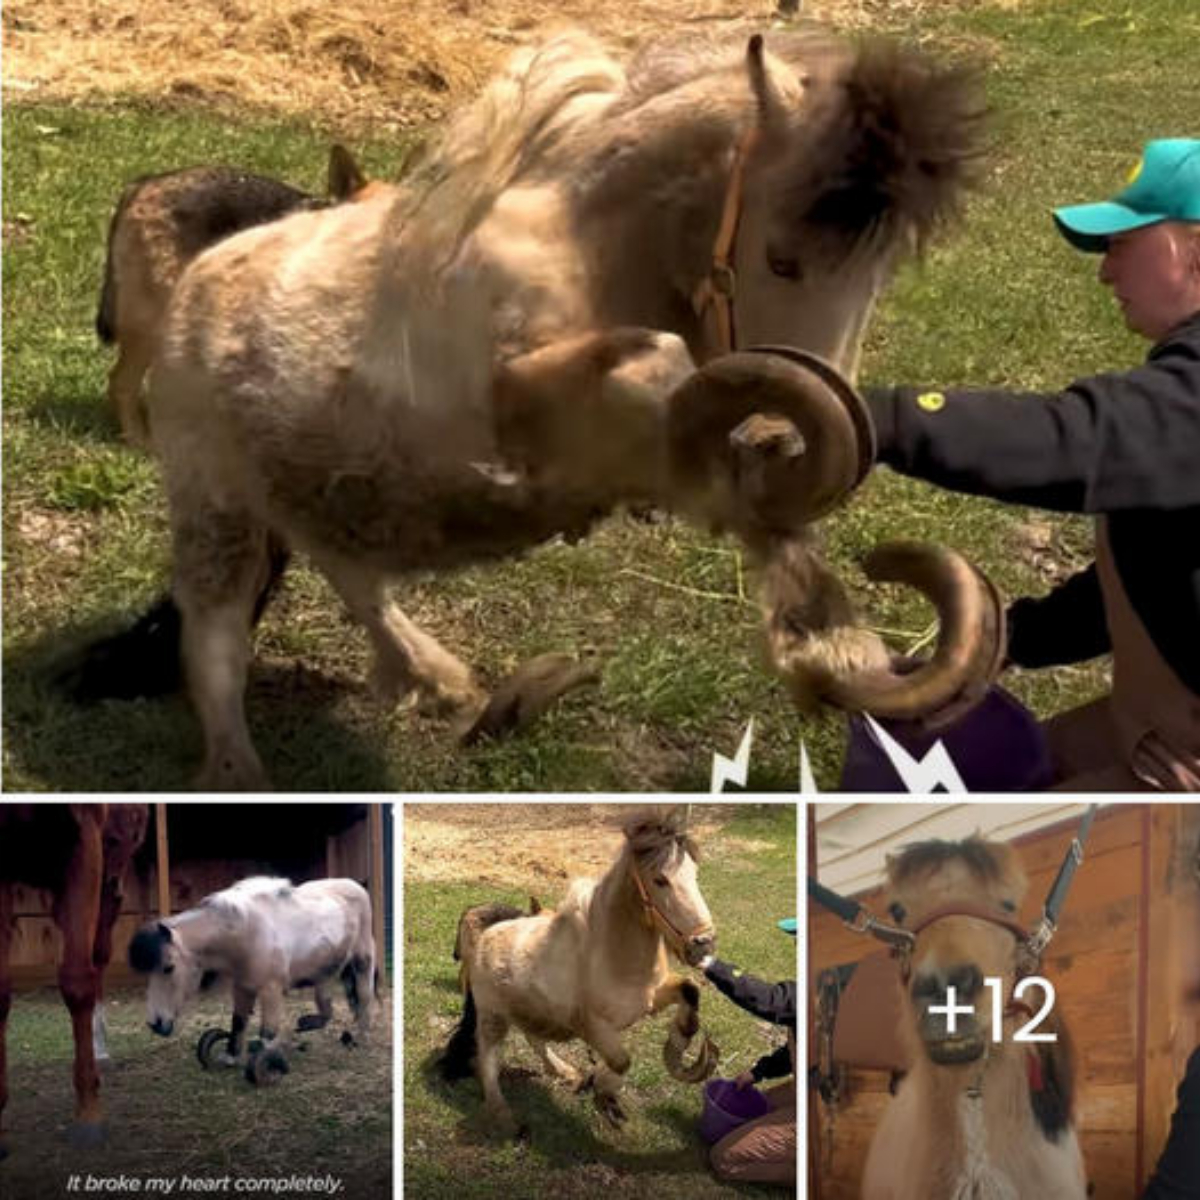 Pony with Overgrown Hooves Finds Relief from Neglect, Walks Normally Again After Rehabilitation